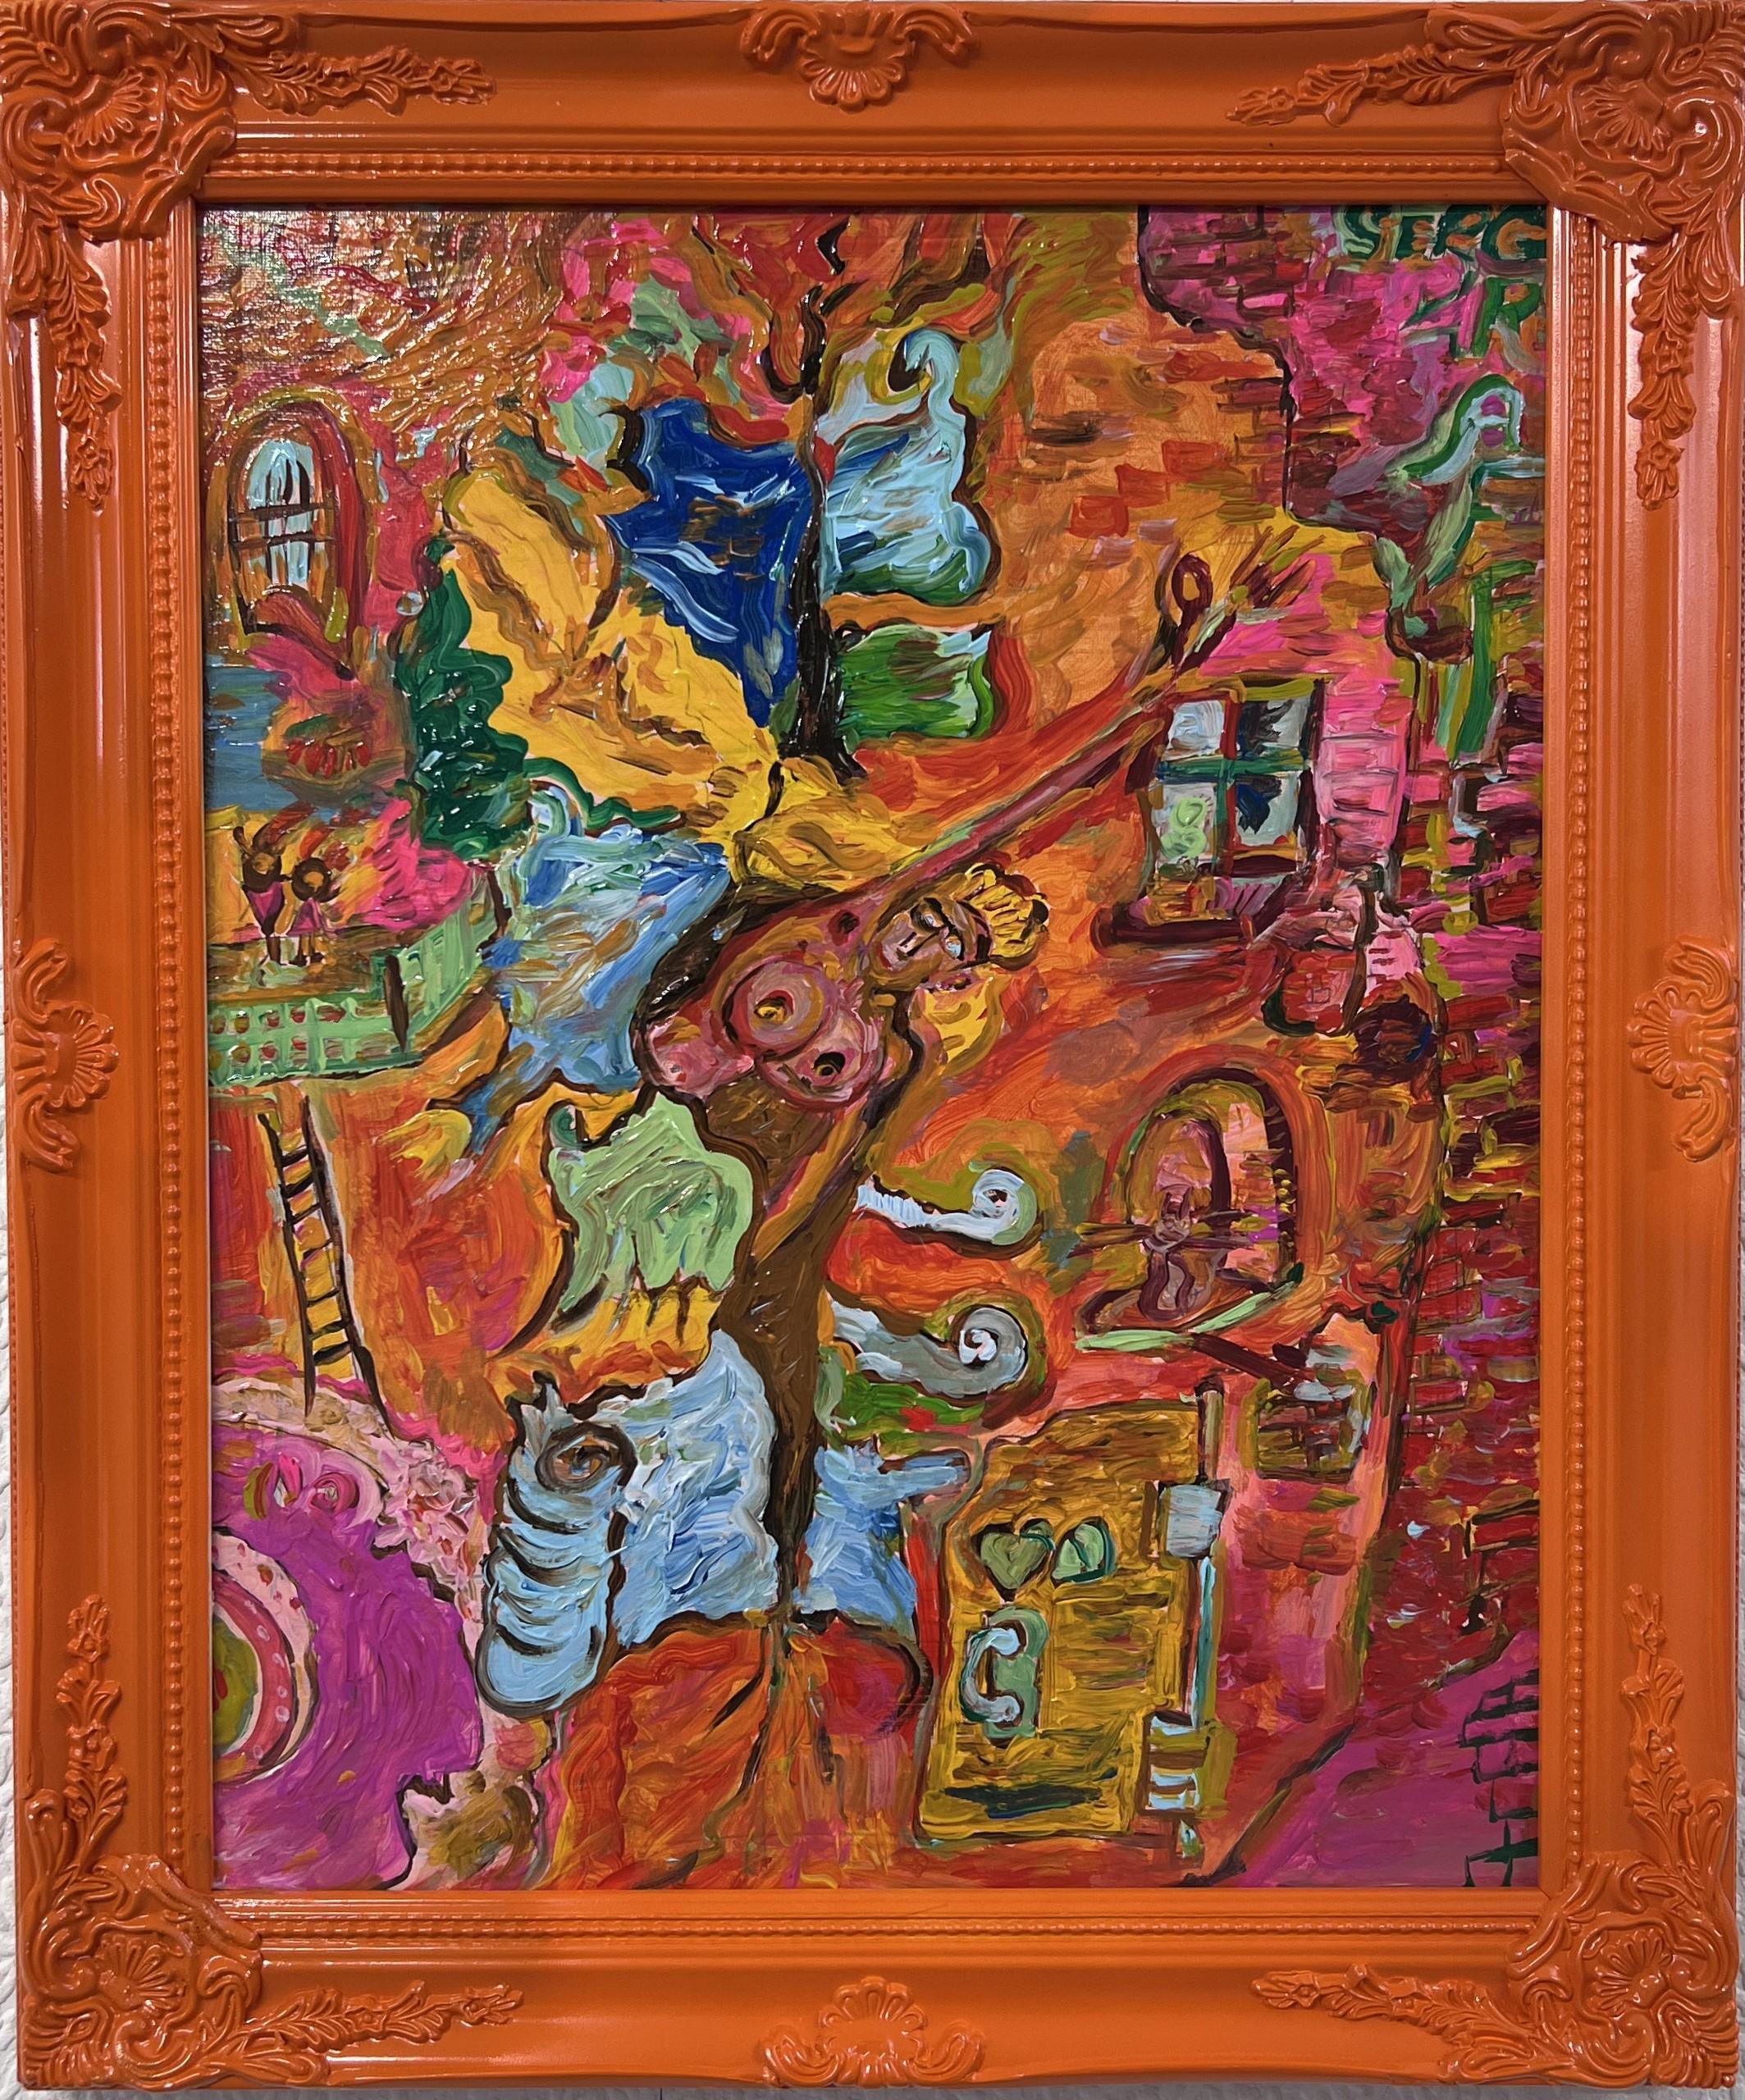 This is a unique original acrylic/oil painting on canvas in a fantasy abstract style by Serg Graff Titled "Jump from the Painting № 2". 
It comes signed, dated, and with a COA (Certificate of Authenticity). 

Presented in an exclusive orange frame.